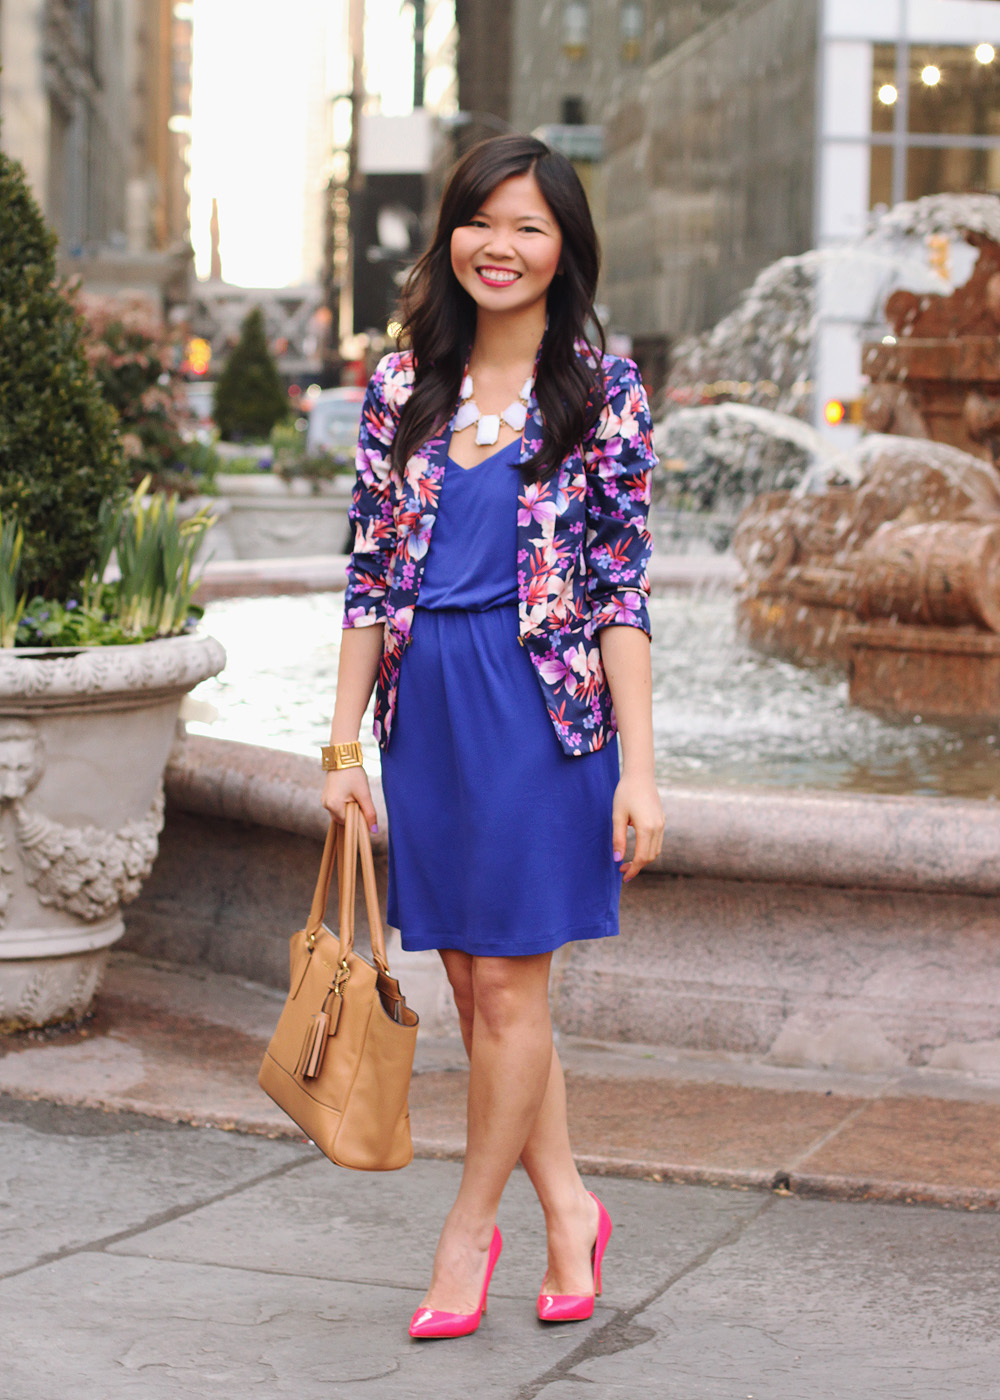 Skirt The Rules Blog; NYC fashion blogger; style blog; spring outfit photos; Forever 21 floral blazer; Gap blue jersey dress; Banana Republic white sparkle stone necklace; CC Skye geometric gold bracelet; Essie Play Date nail polish; ShoeMint Kaylen neon pink pump; Coach Candace carry all tote in camel